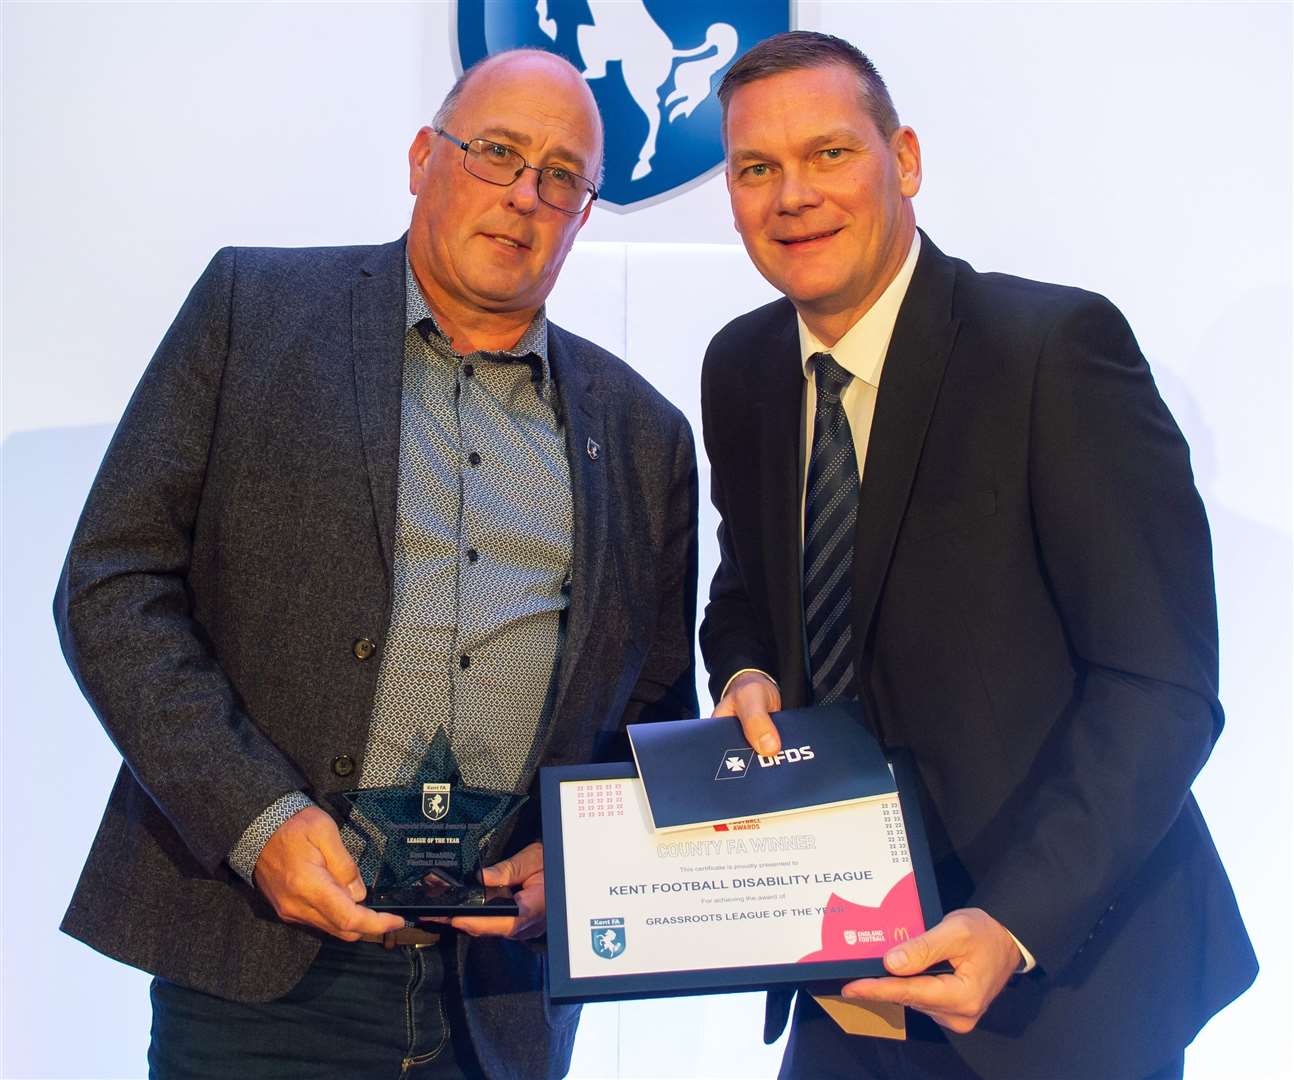 Kent Disability Football League, Grassroots League of the Year. Picture: Kent FA